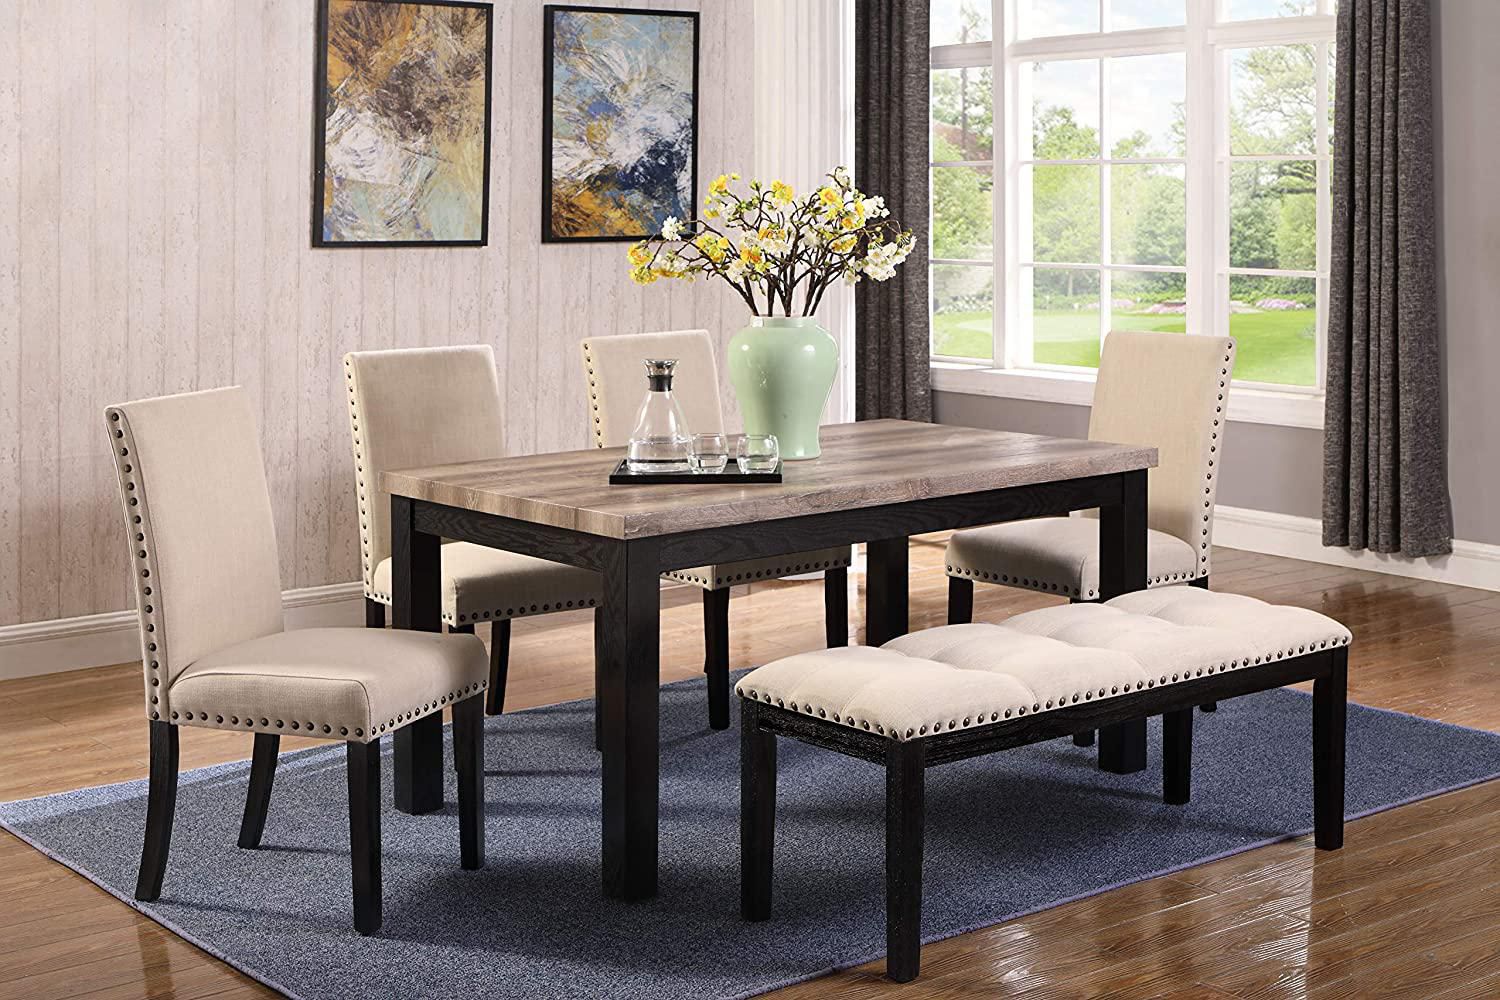 K LIVING Elisa Wood Top Dining Table Set with 4 Chairs and 1 Bench